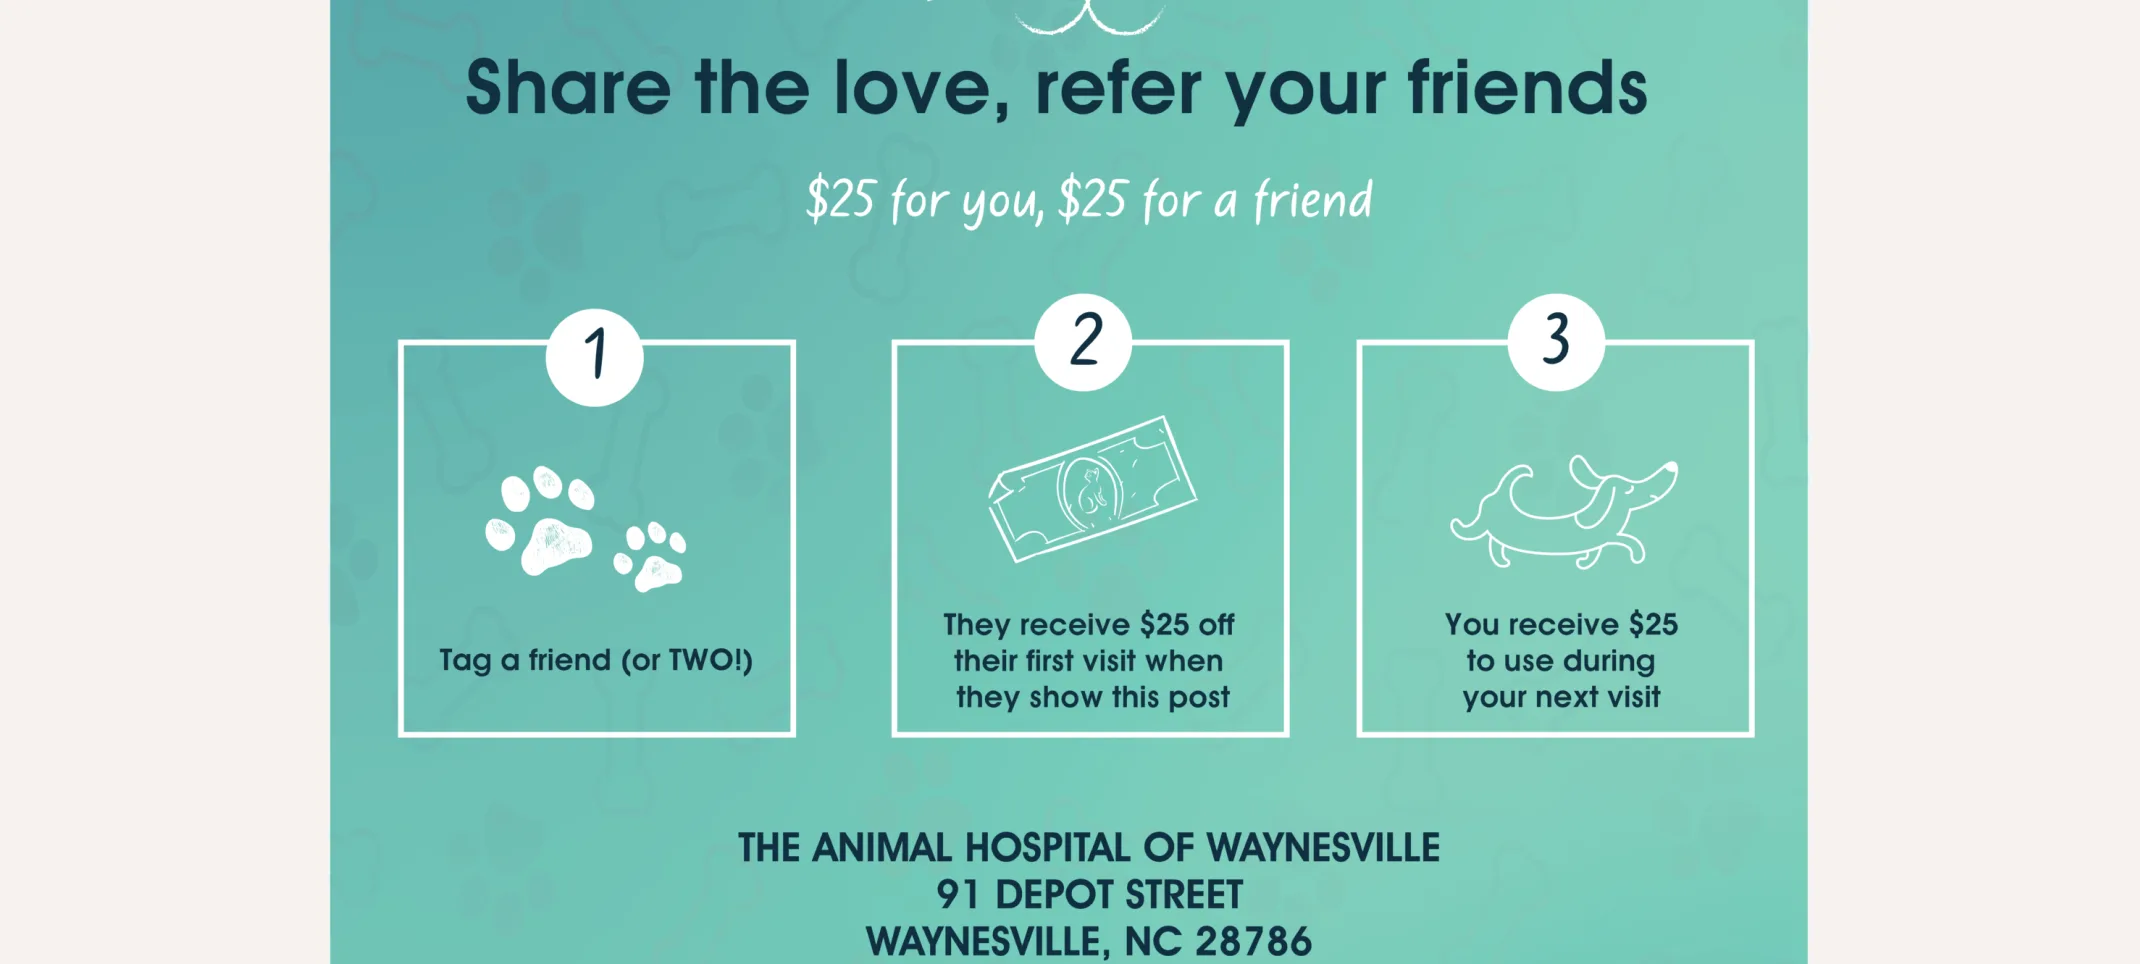 Share the Love Promotion Details